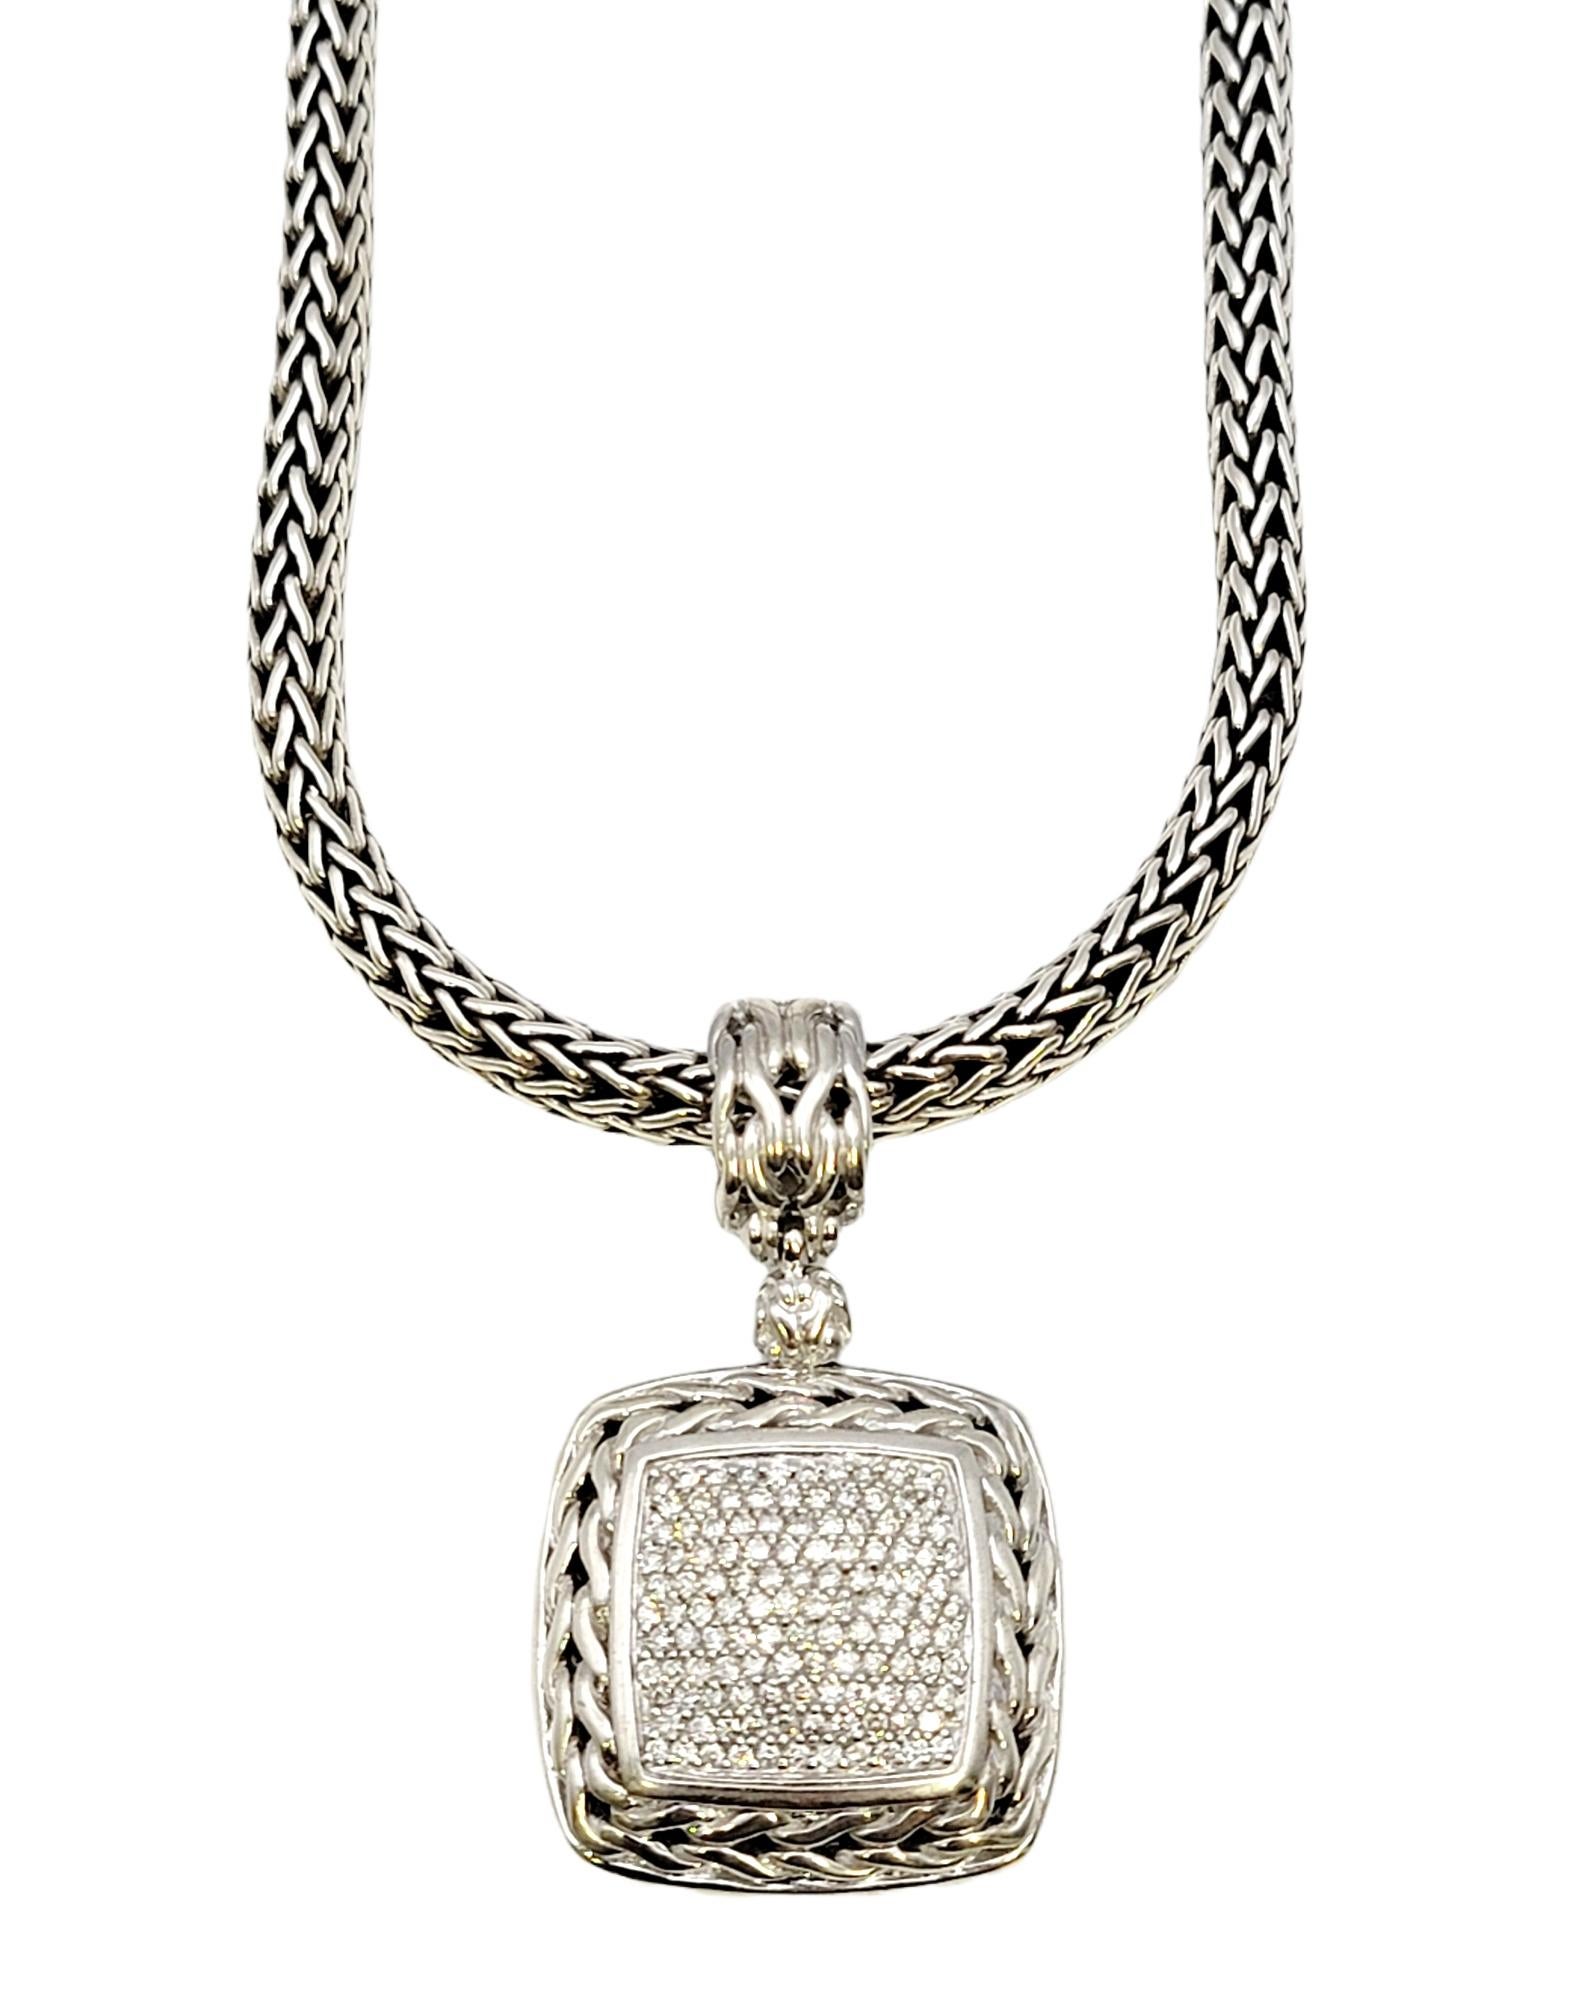 Gorgeous pave diamond and sterling silver necklace by famed jewelry designer, John Hardy.  Dazzling diamond detail fills the pendant while the polished sterling silver enhances the white brilliance of the stones. Hardy's signature braided chain